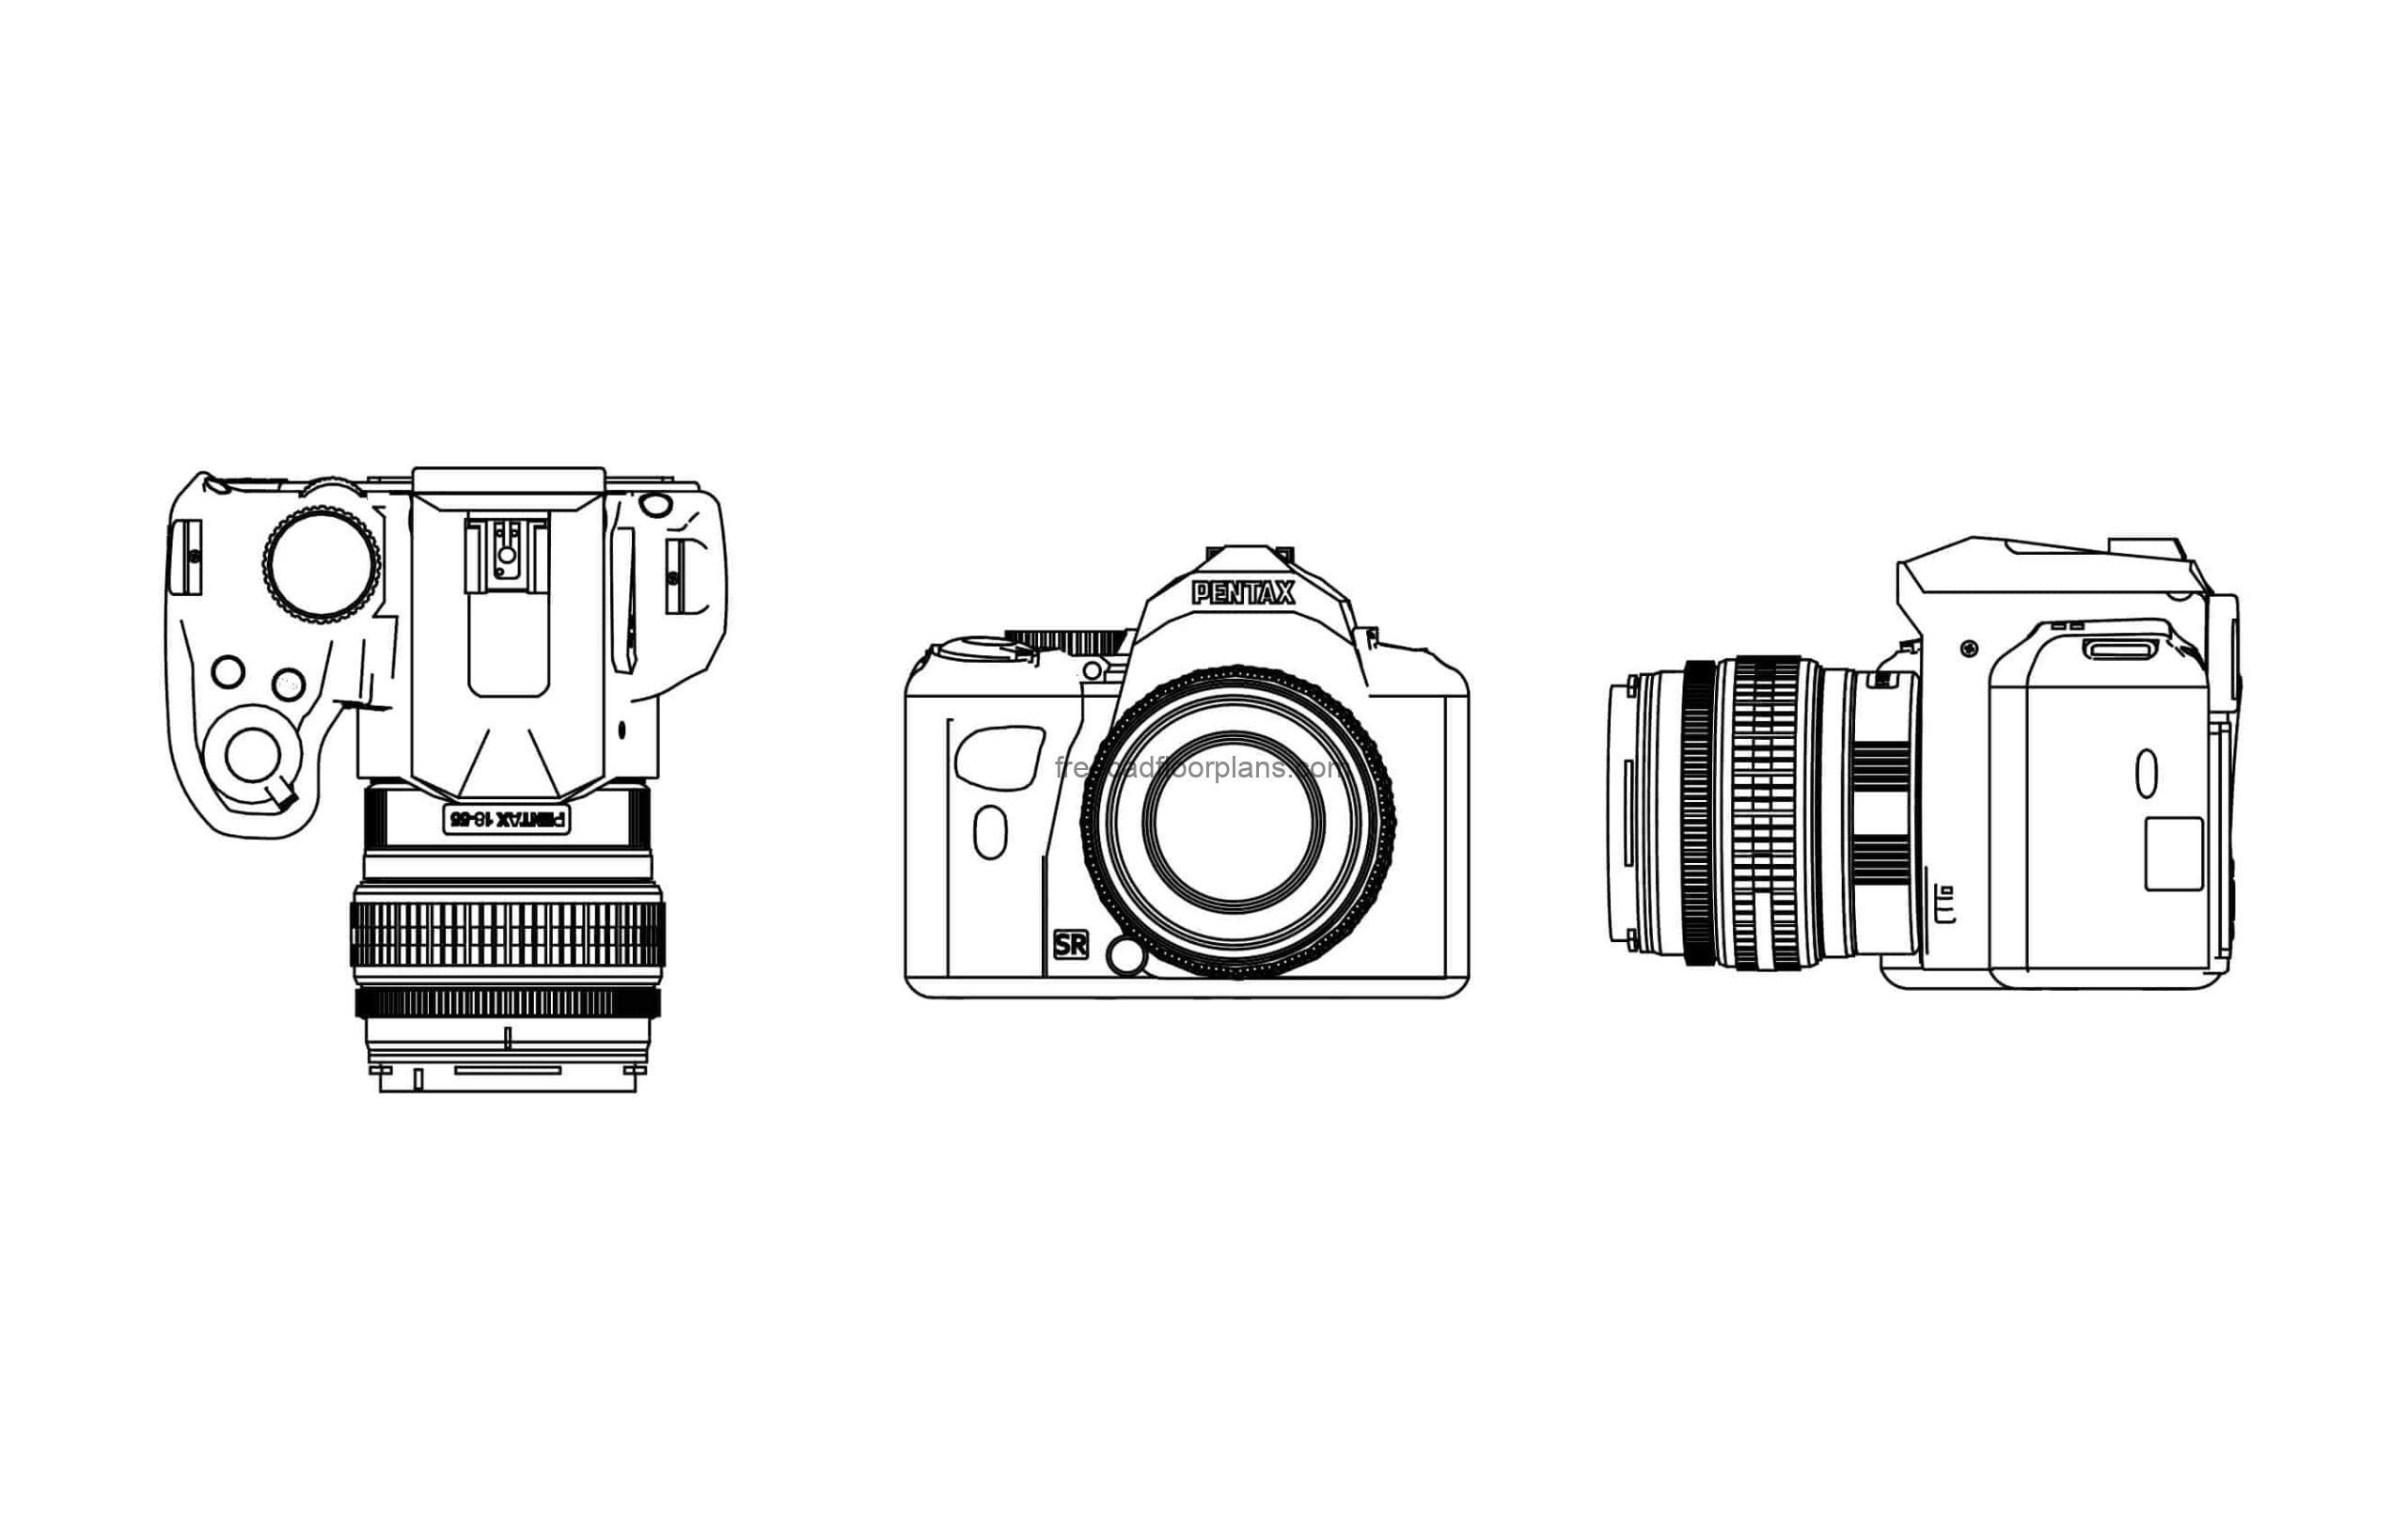 cad block drawing of a DSLR camera all 2d views front, side and plan views dwg model for free download